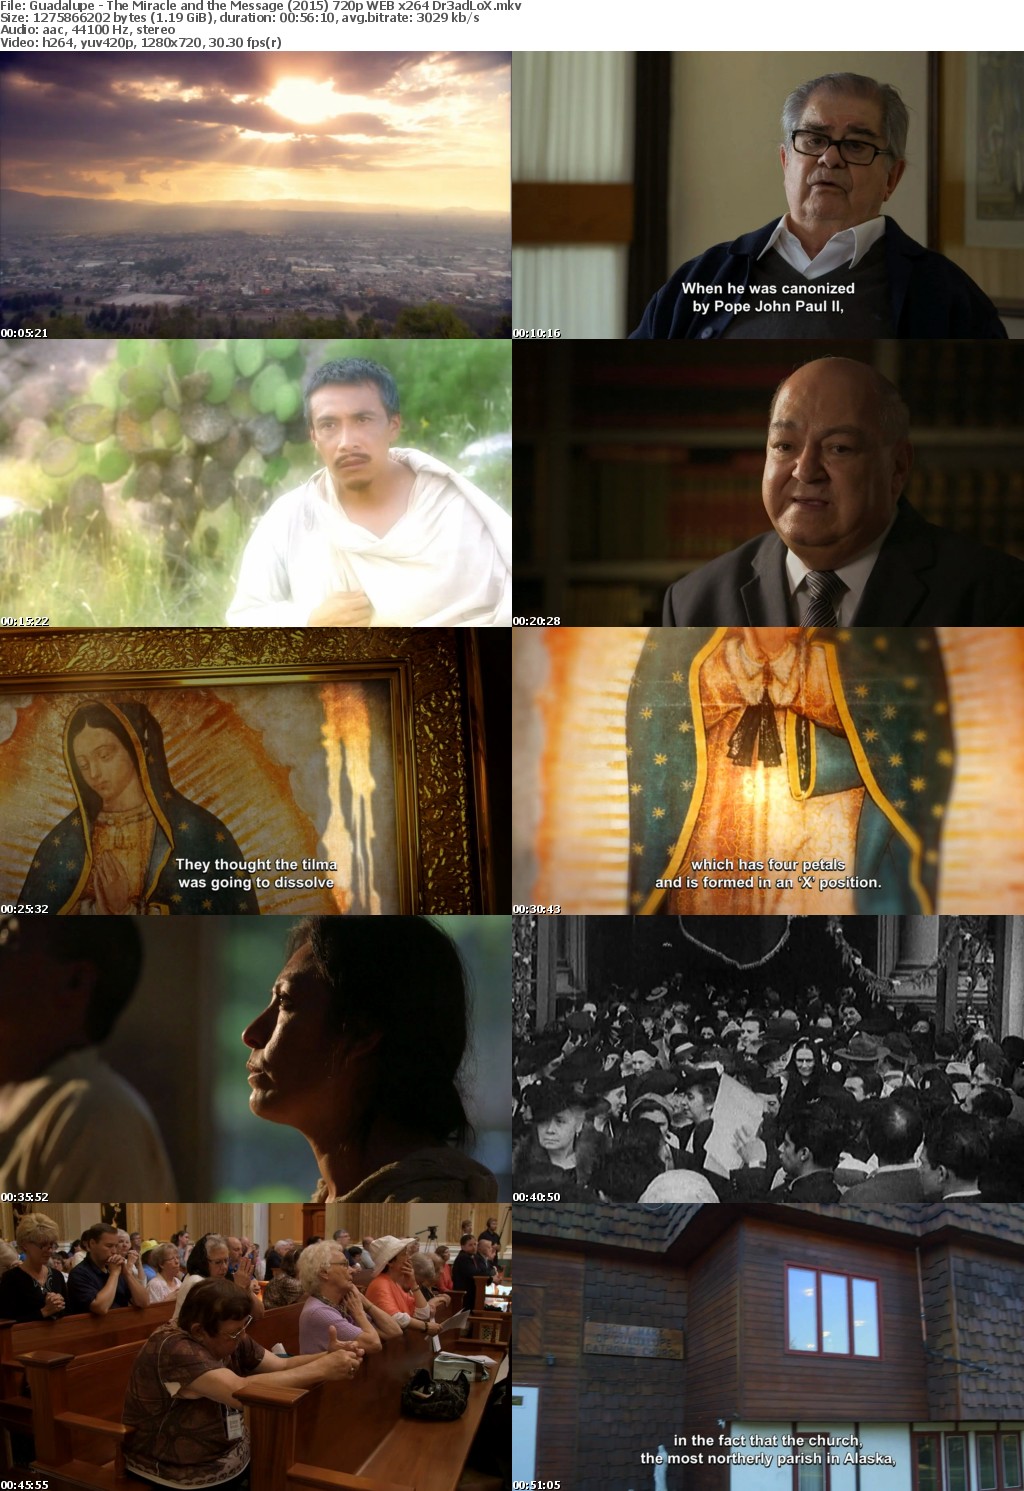 Guadalupe - The Miracle and the Message (2015) 720p WEB x264 Dr3adLoX